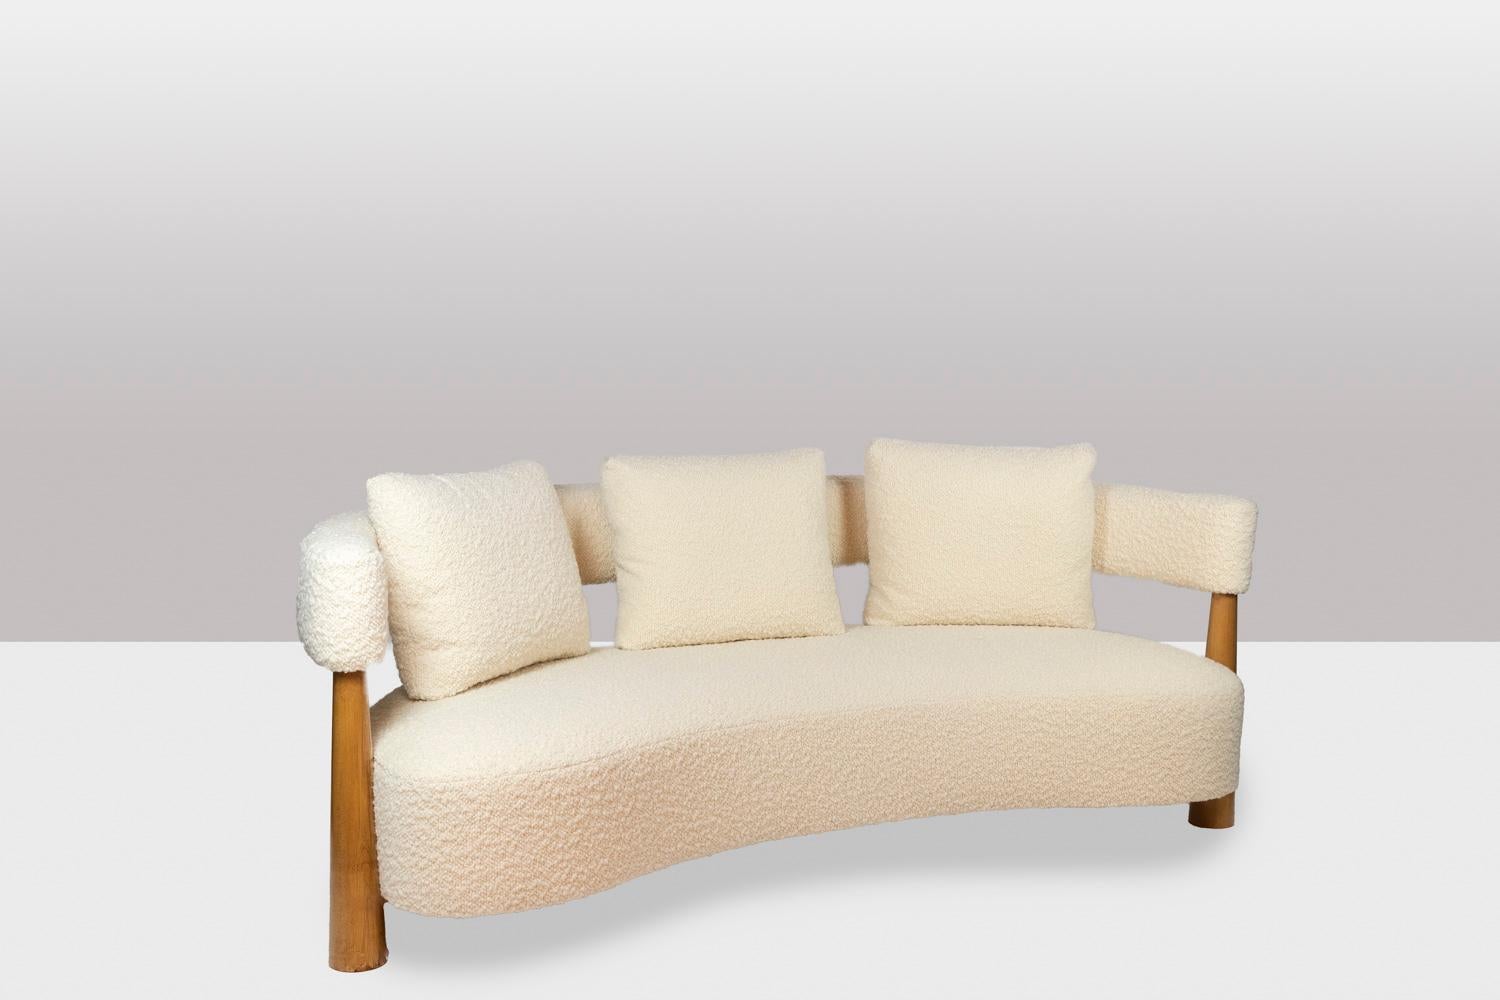 3-seater “bean” or curved sofa, with a gap between the bottom of the backrest and the seat, composed of 4 conical legs in slightly veined solid blond beech interlocking in the backrest, its 3 removable cushions and a fabric with fine white